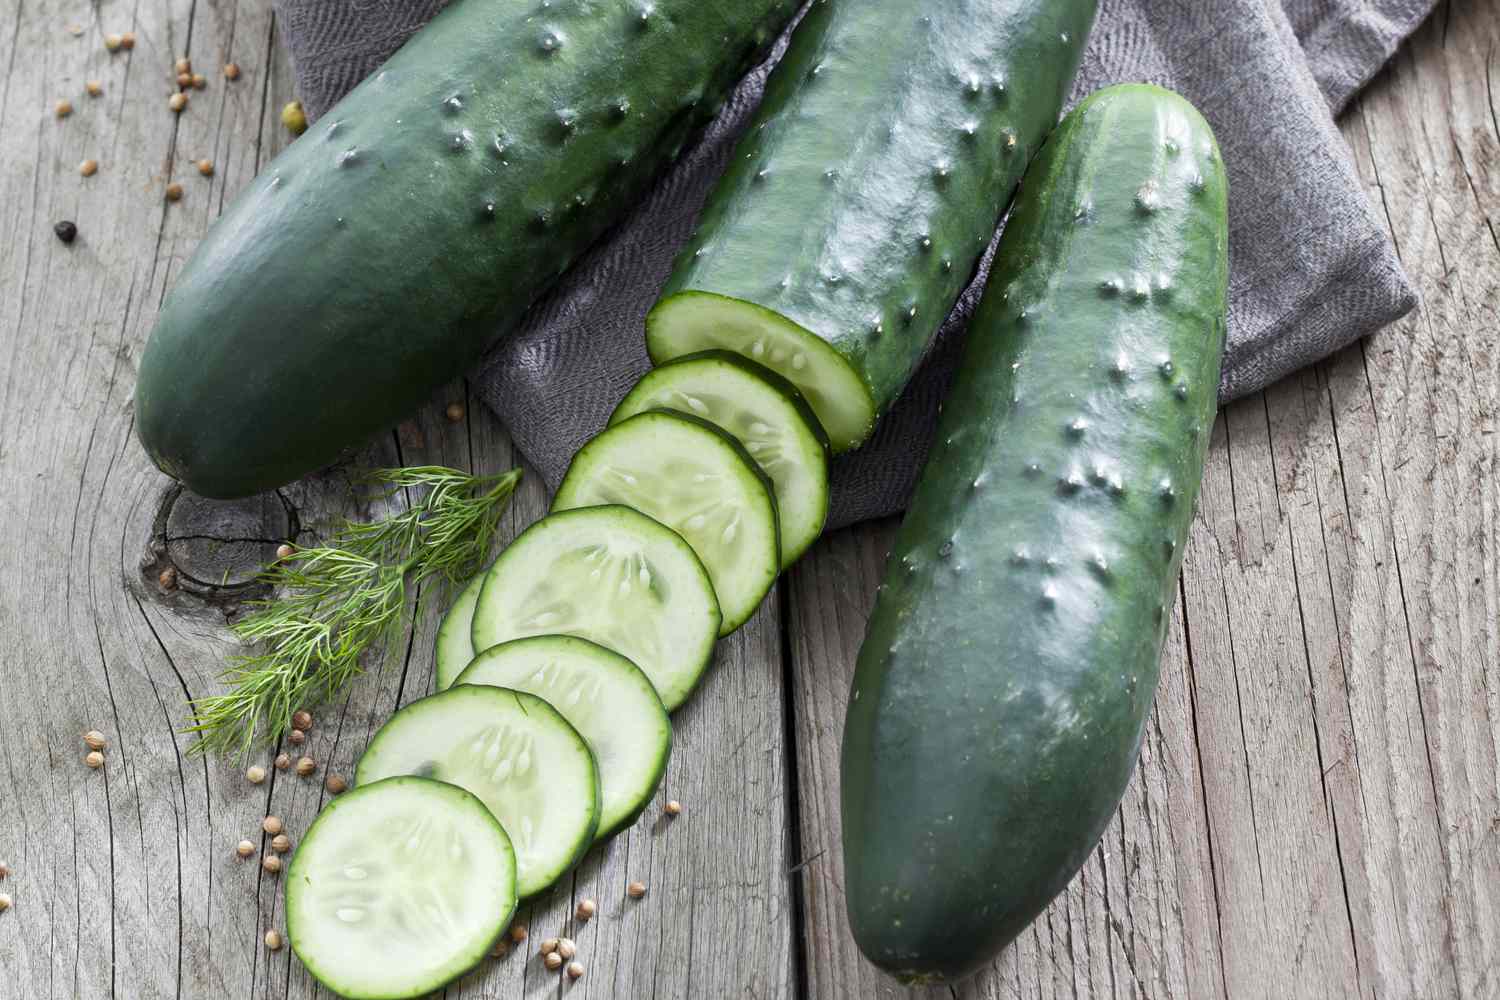 What Are The Health Benefits Of Cucumbers